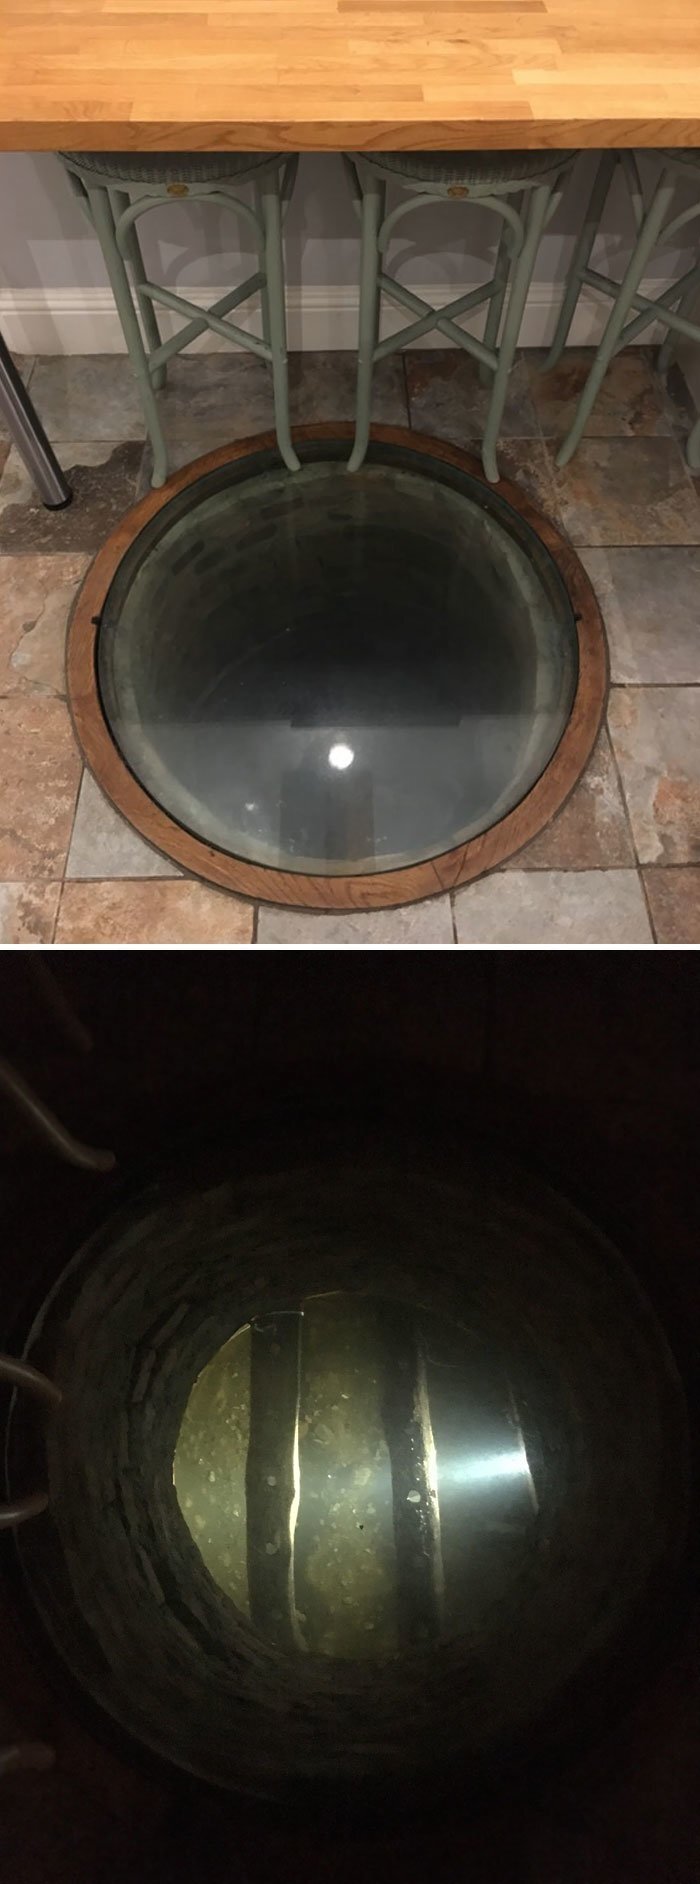 #18 The House I'm Staying In Has Kept Its Original Well As A Feature